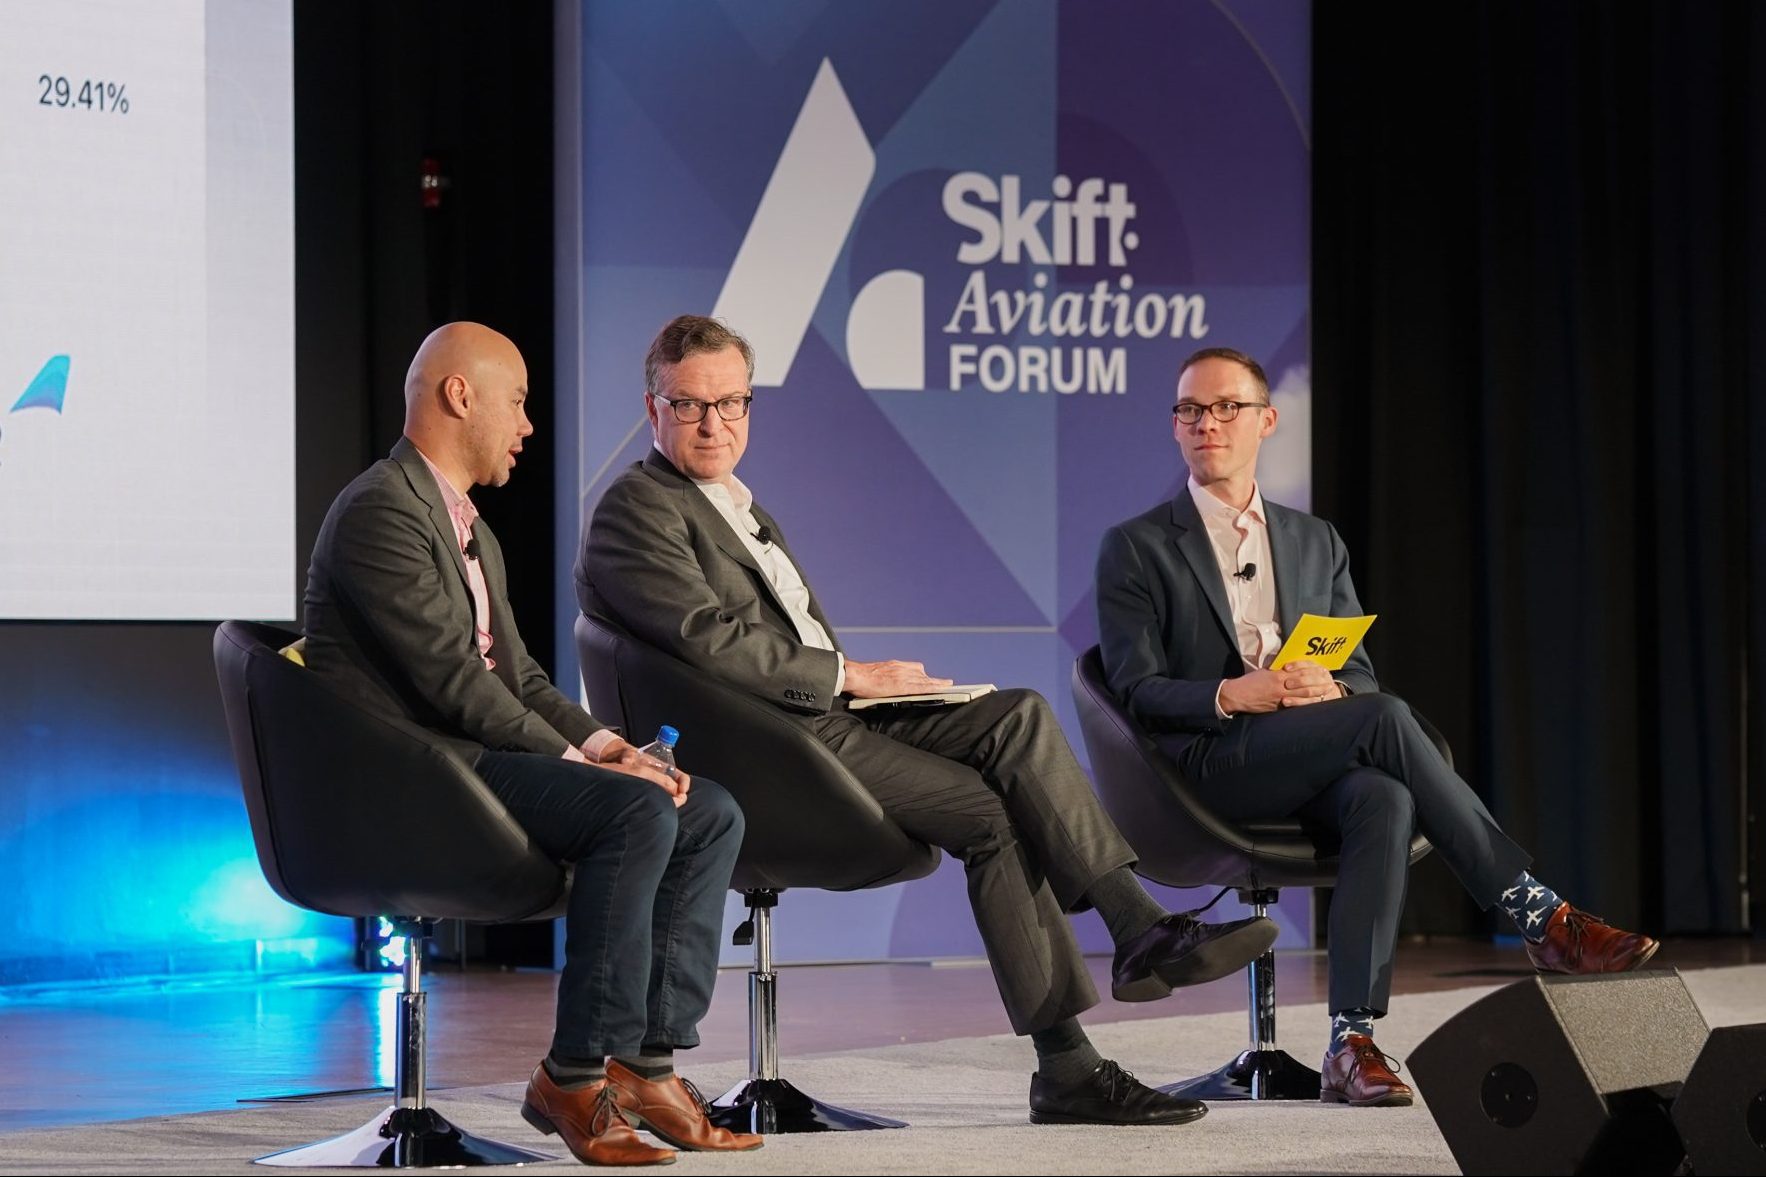 Lukas Johnson (left) of Breeze Airways and John Thomas of Connect Airlines speaking on stage at Skift Aviation Forum in Dallas, Texas, November 2022